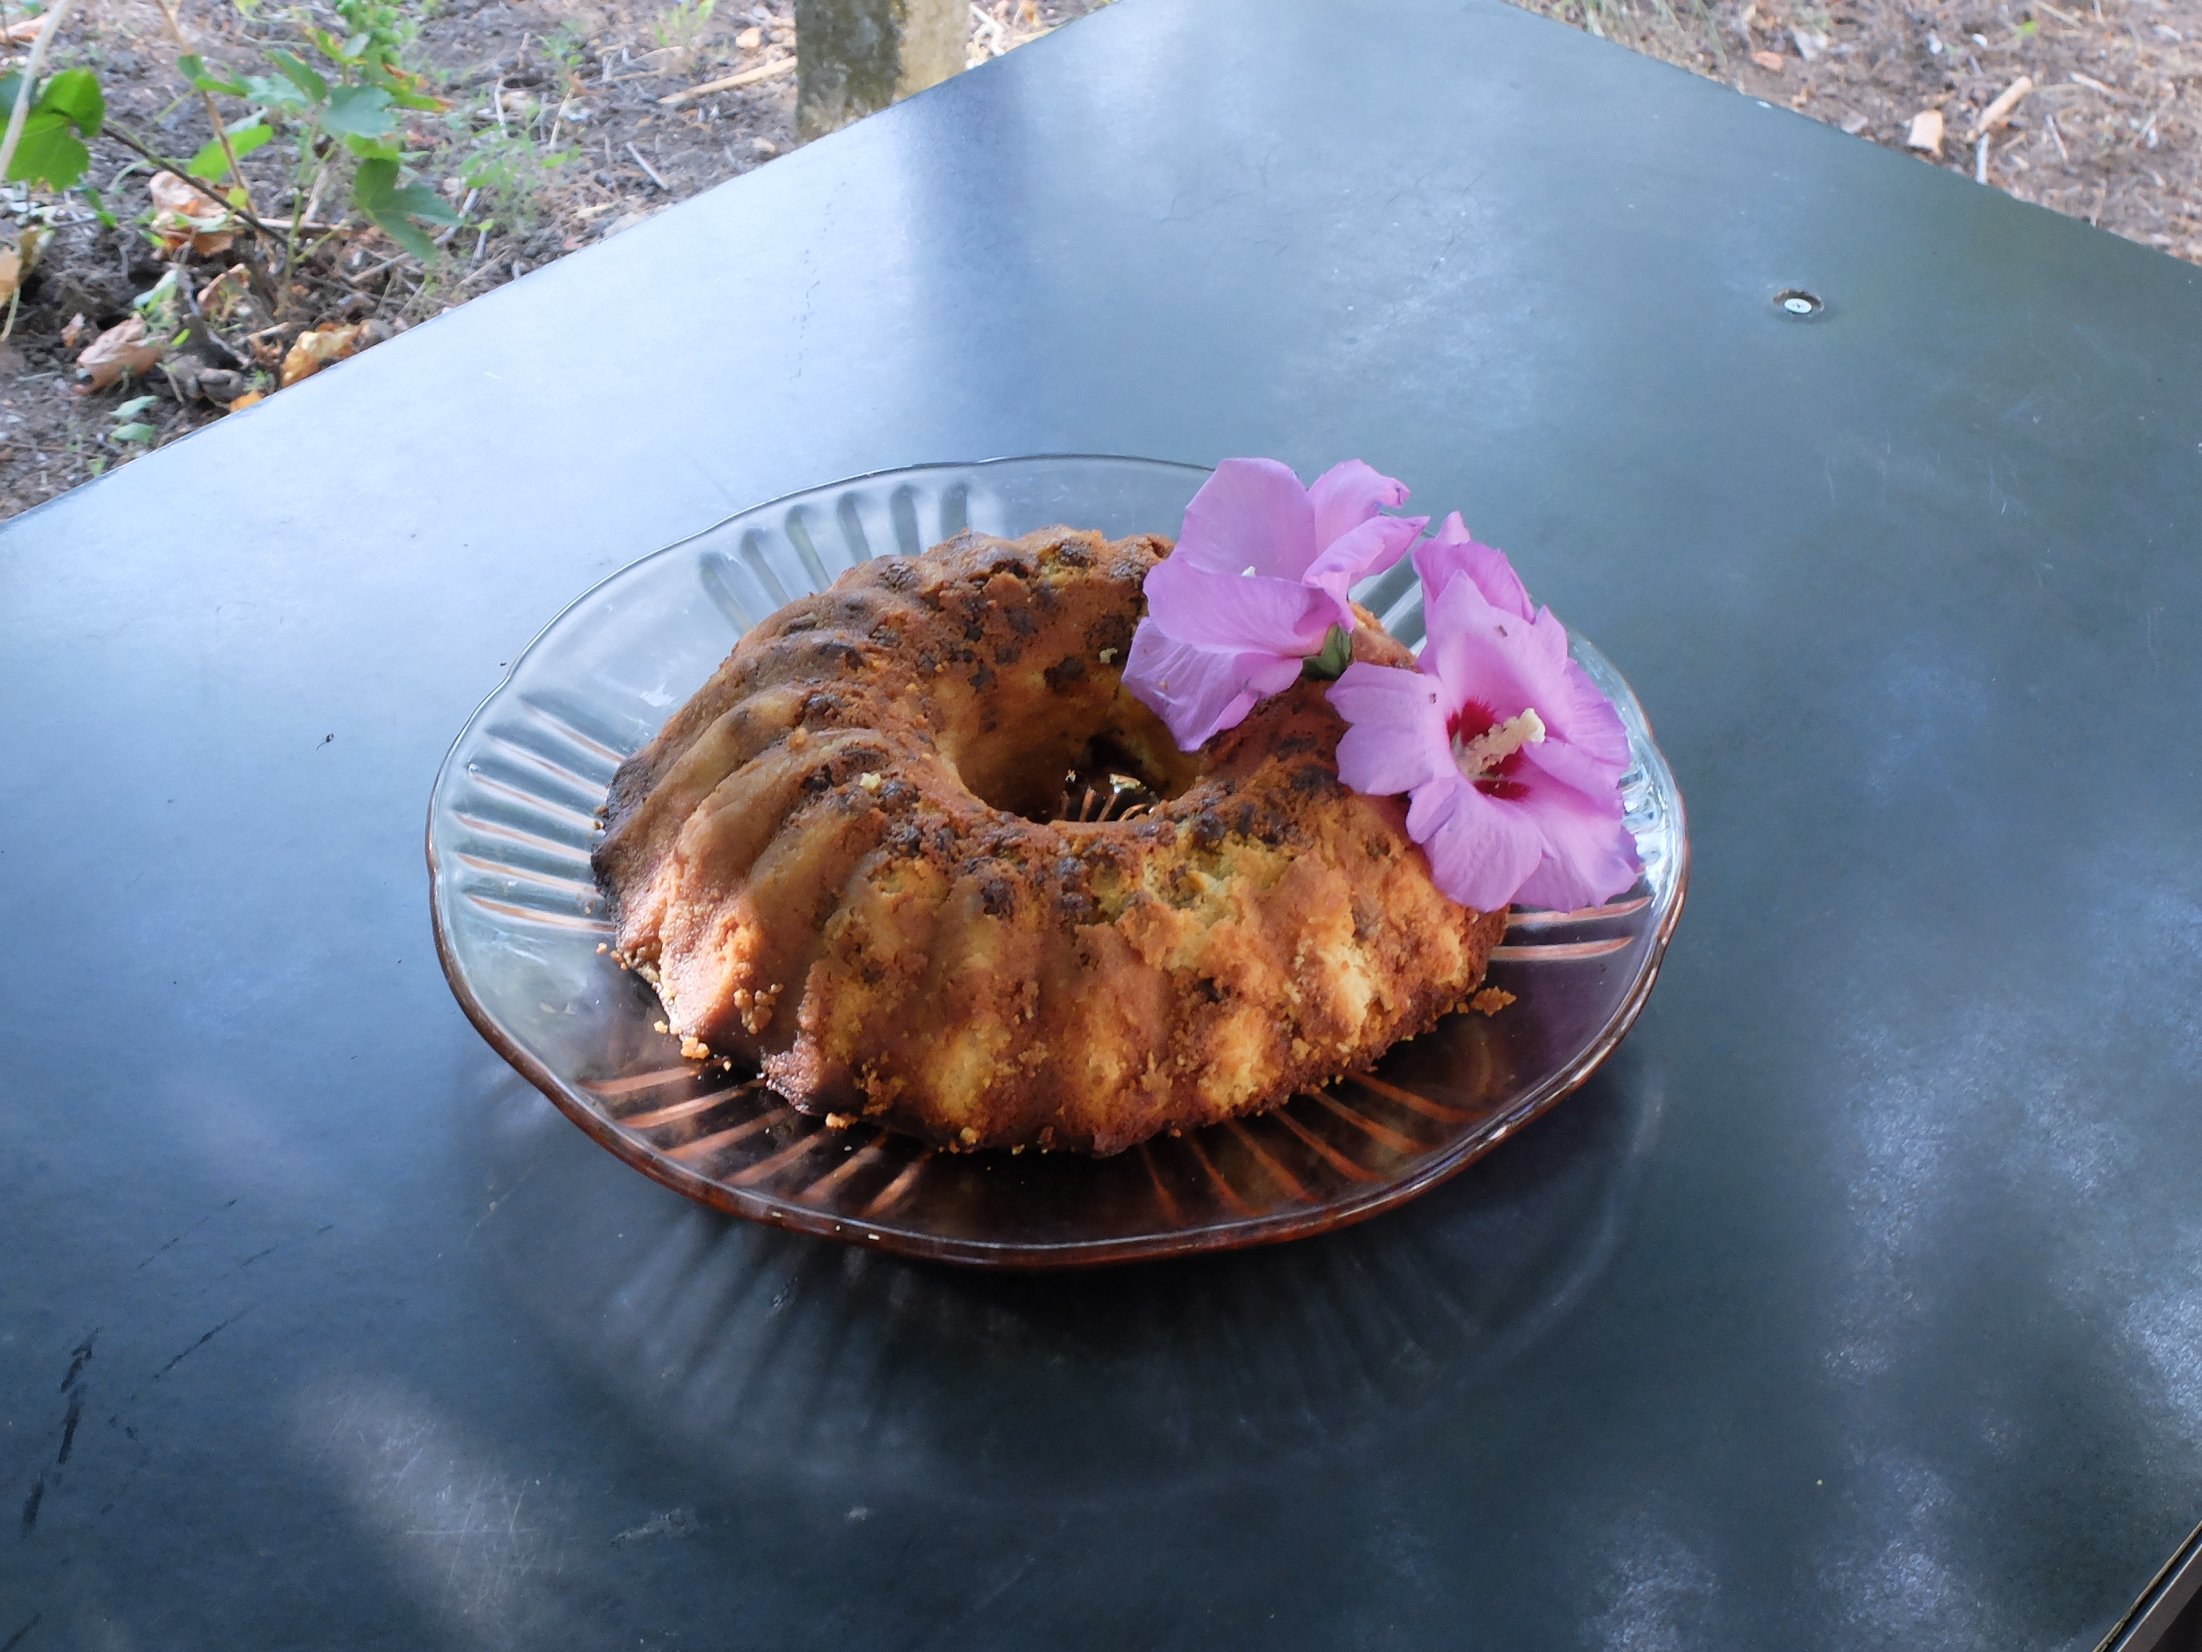   Takeshi Yoshida, Recipe: Quark cake with no base, glass plate from baba Vasa's kitchen, purple hibiscus flowers from the bush at Maritza Street 22, Shabla, cooked by Laurenz  